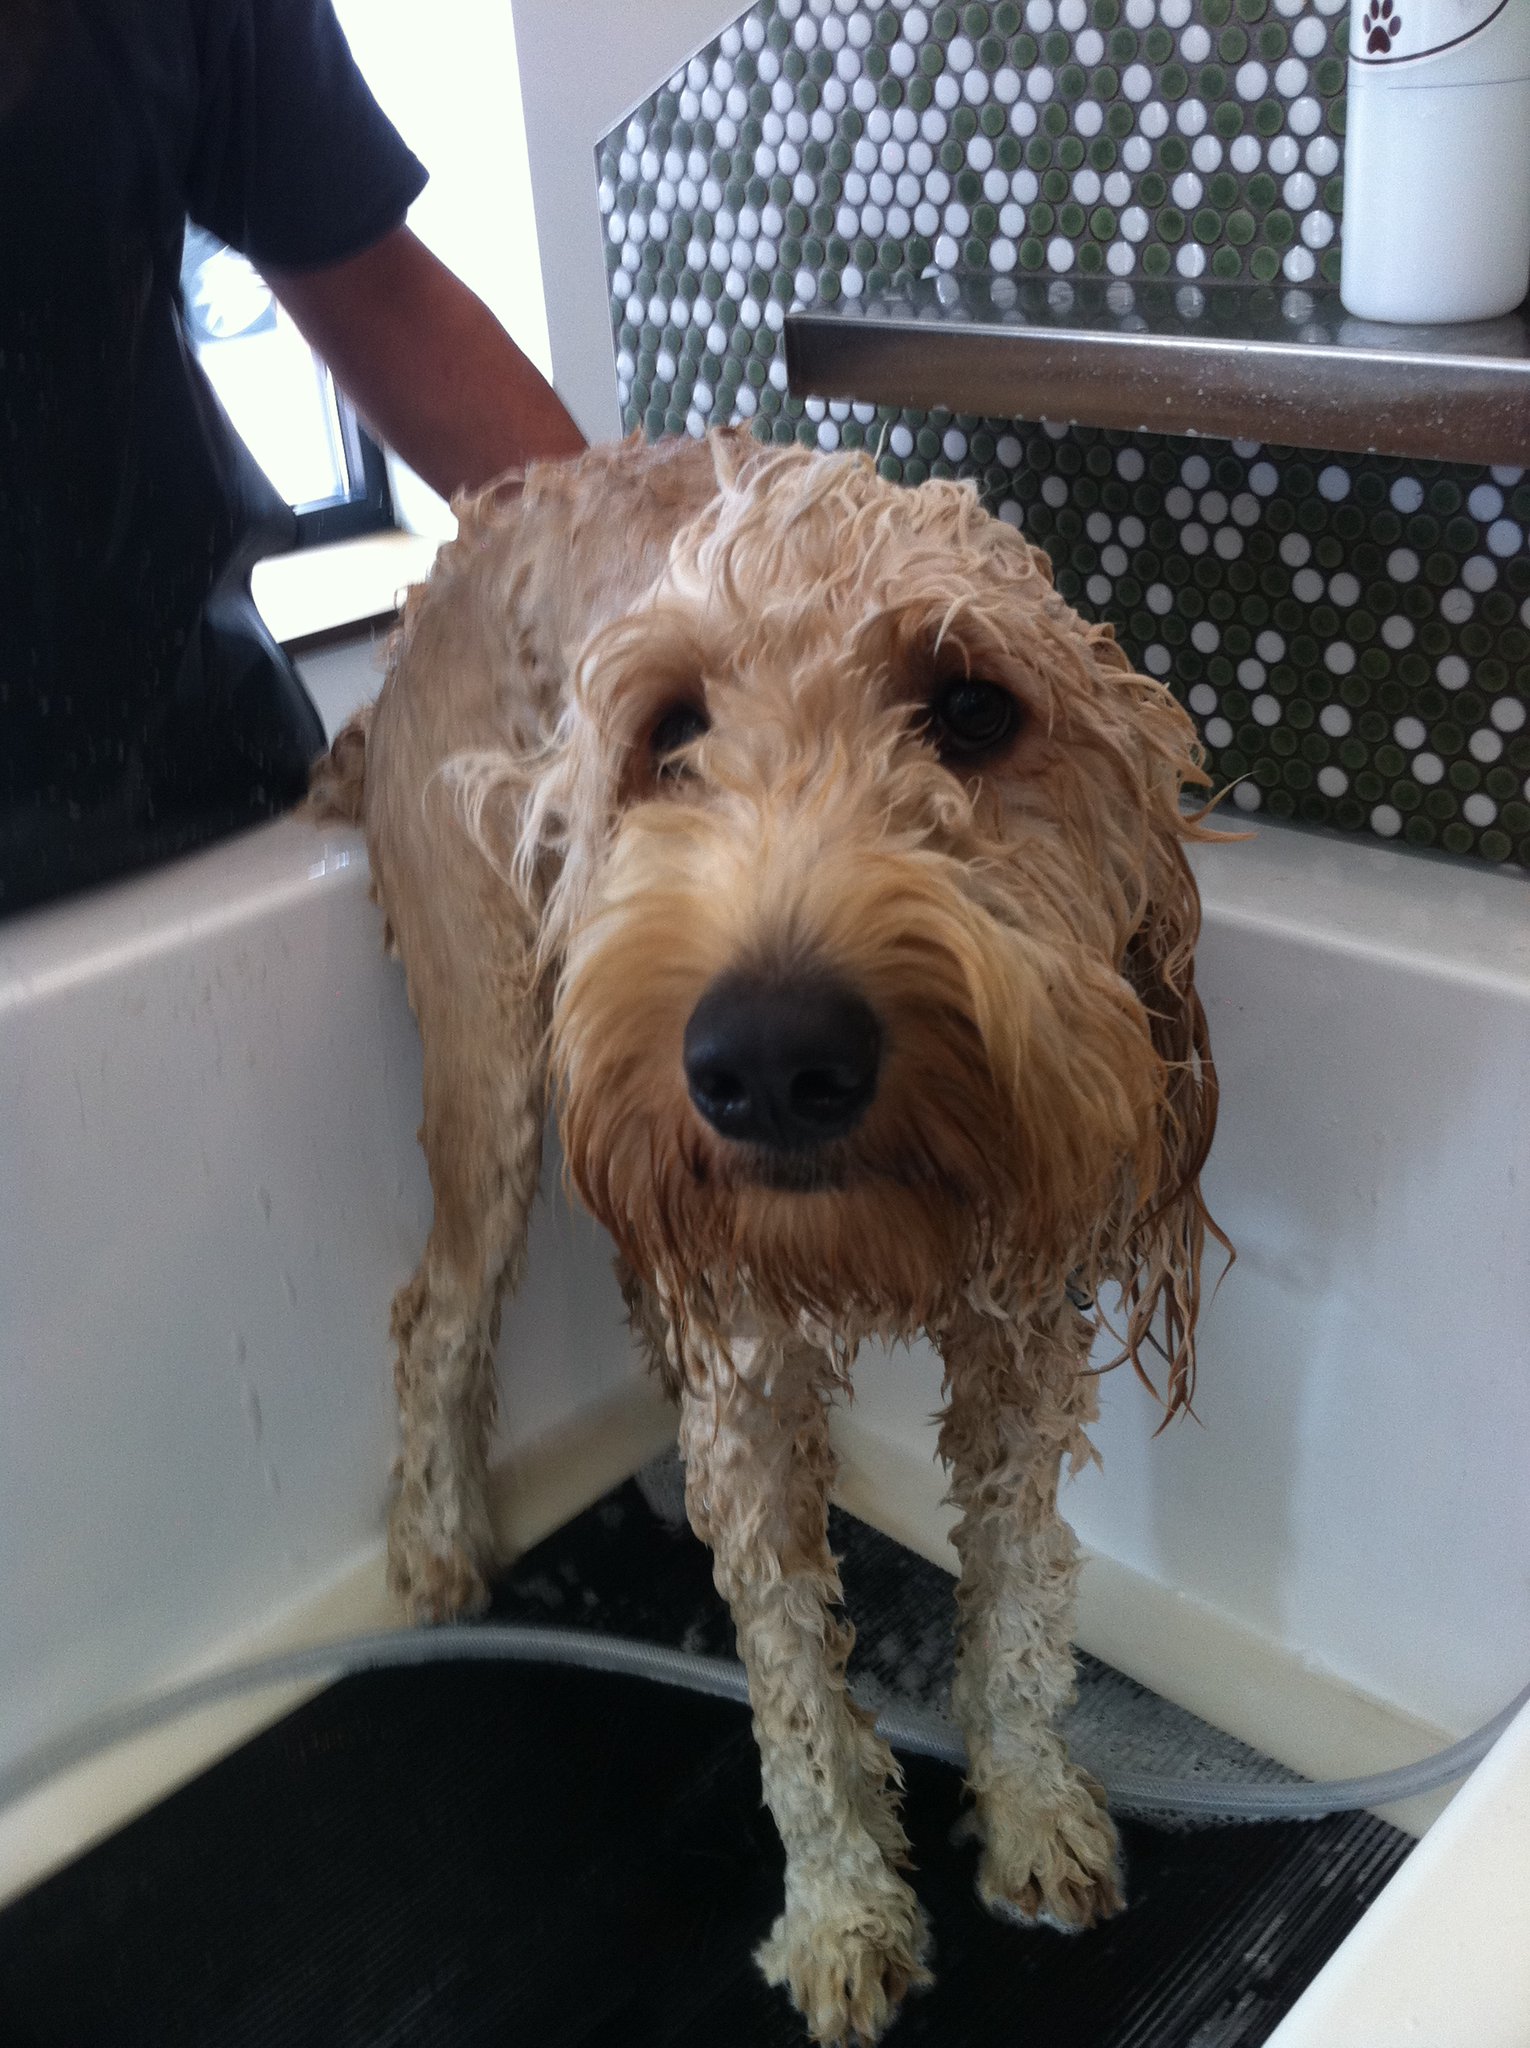 Lulu the doodle at the dog groomer